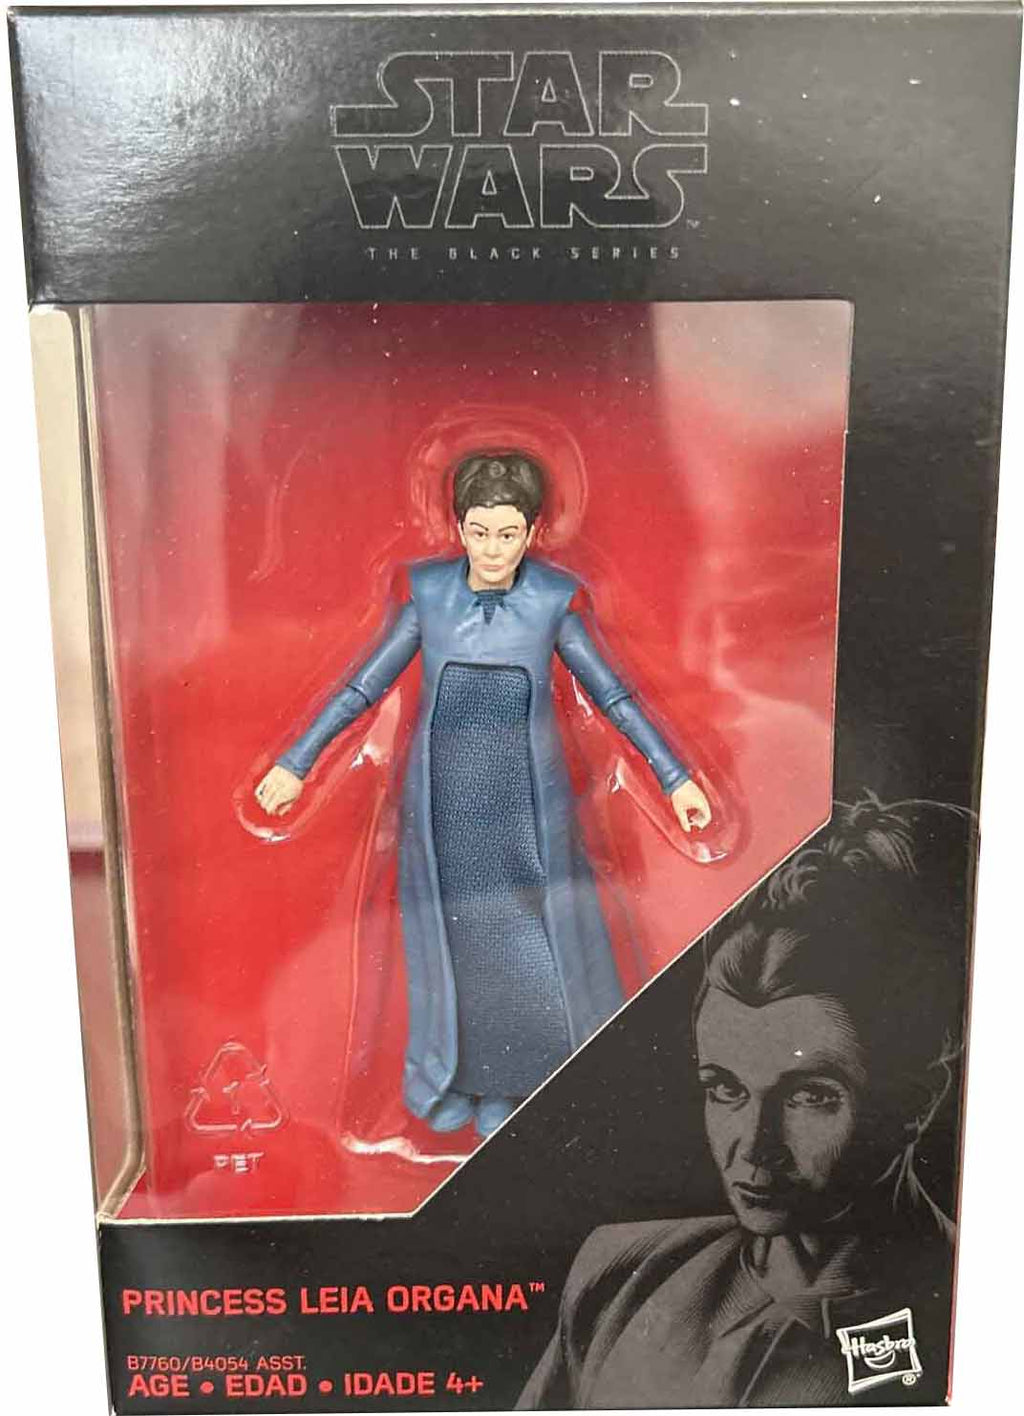 Star Wars The Black Series 3.75 Inch Scale Action Figure - Princess Leia Organa